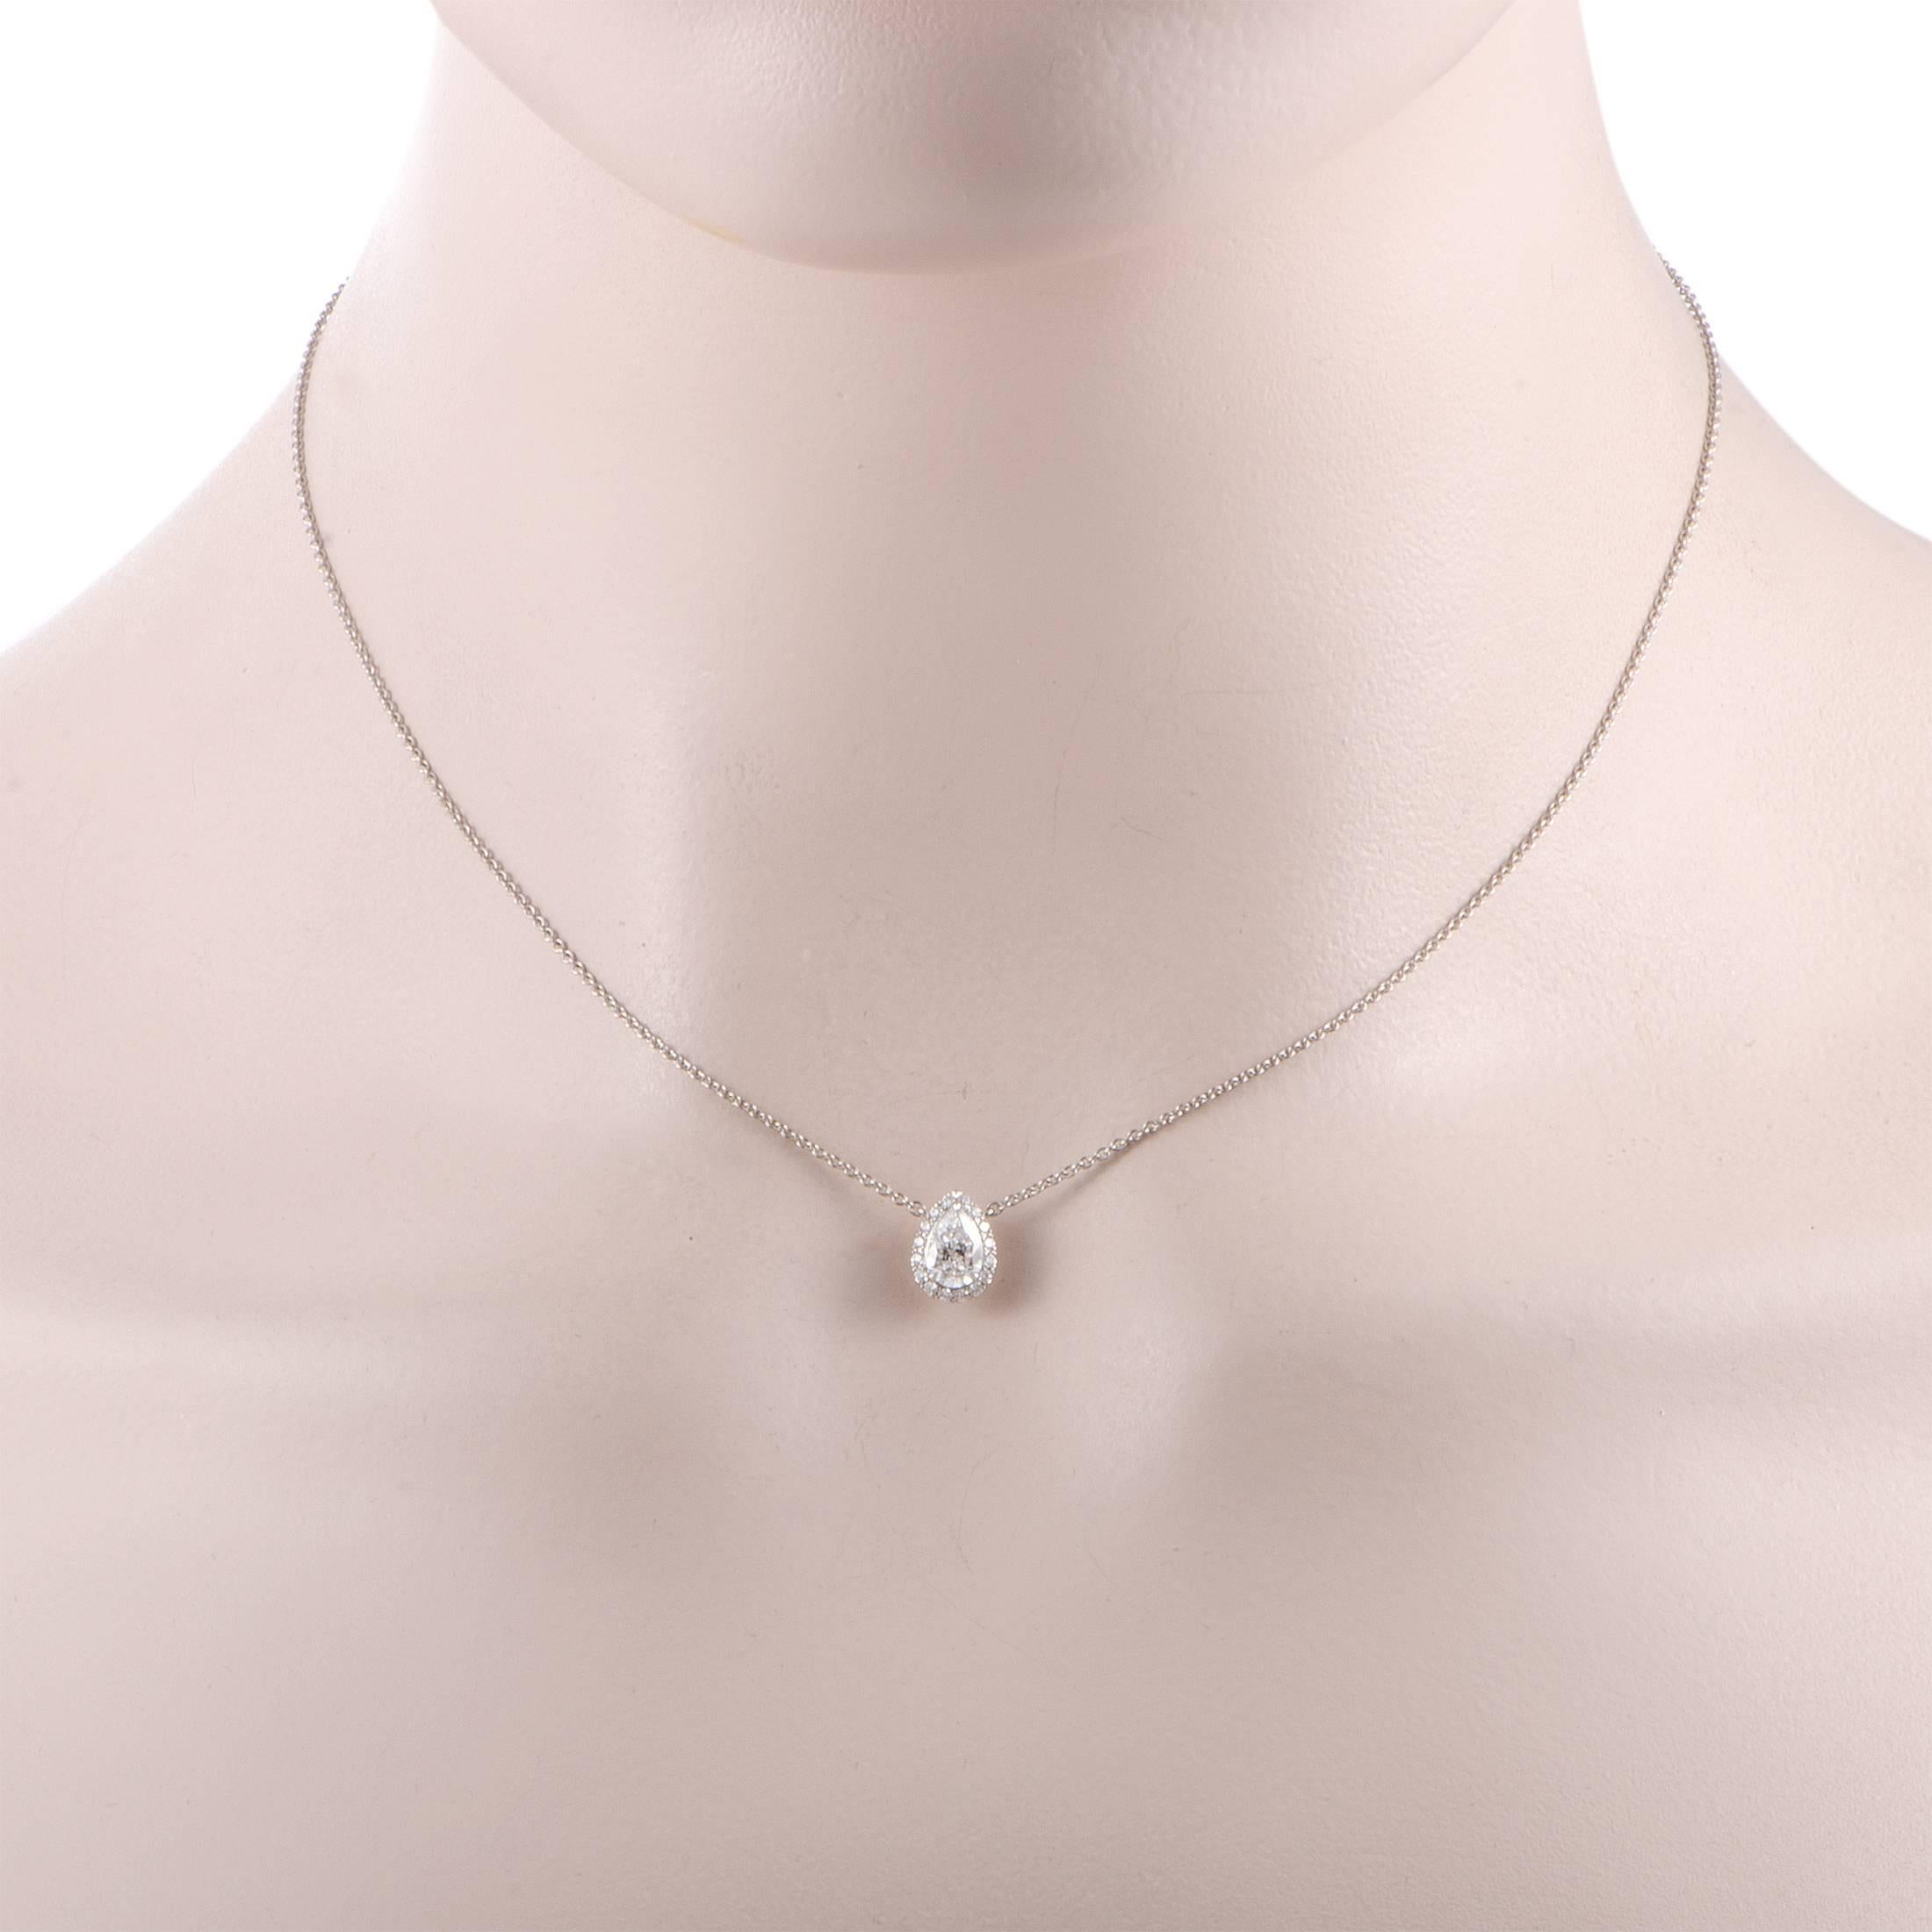 An epitome of refined elegance, this sublime platinum necklace offers a splendidly classy appearance. Designed by Harry Winston, the necklace features a pendant that is set with a majestic center diamond stone of D color and VVS1 clarity weighing